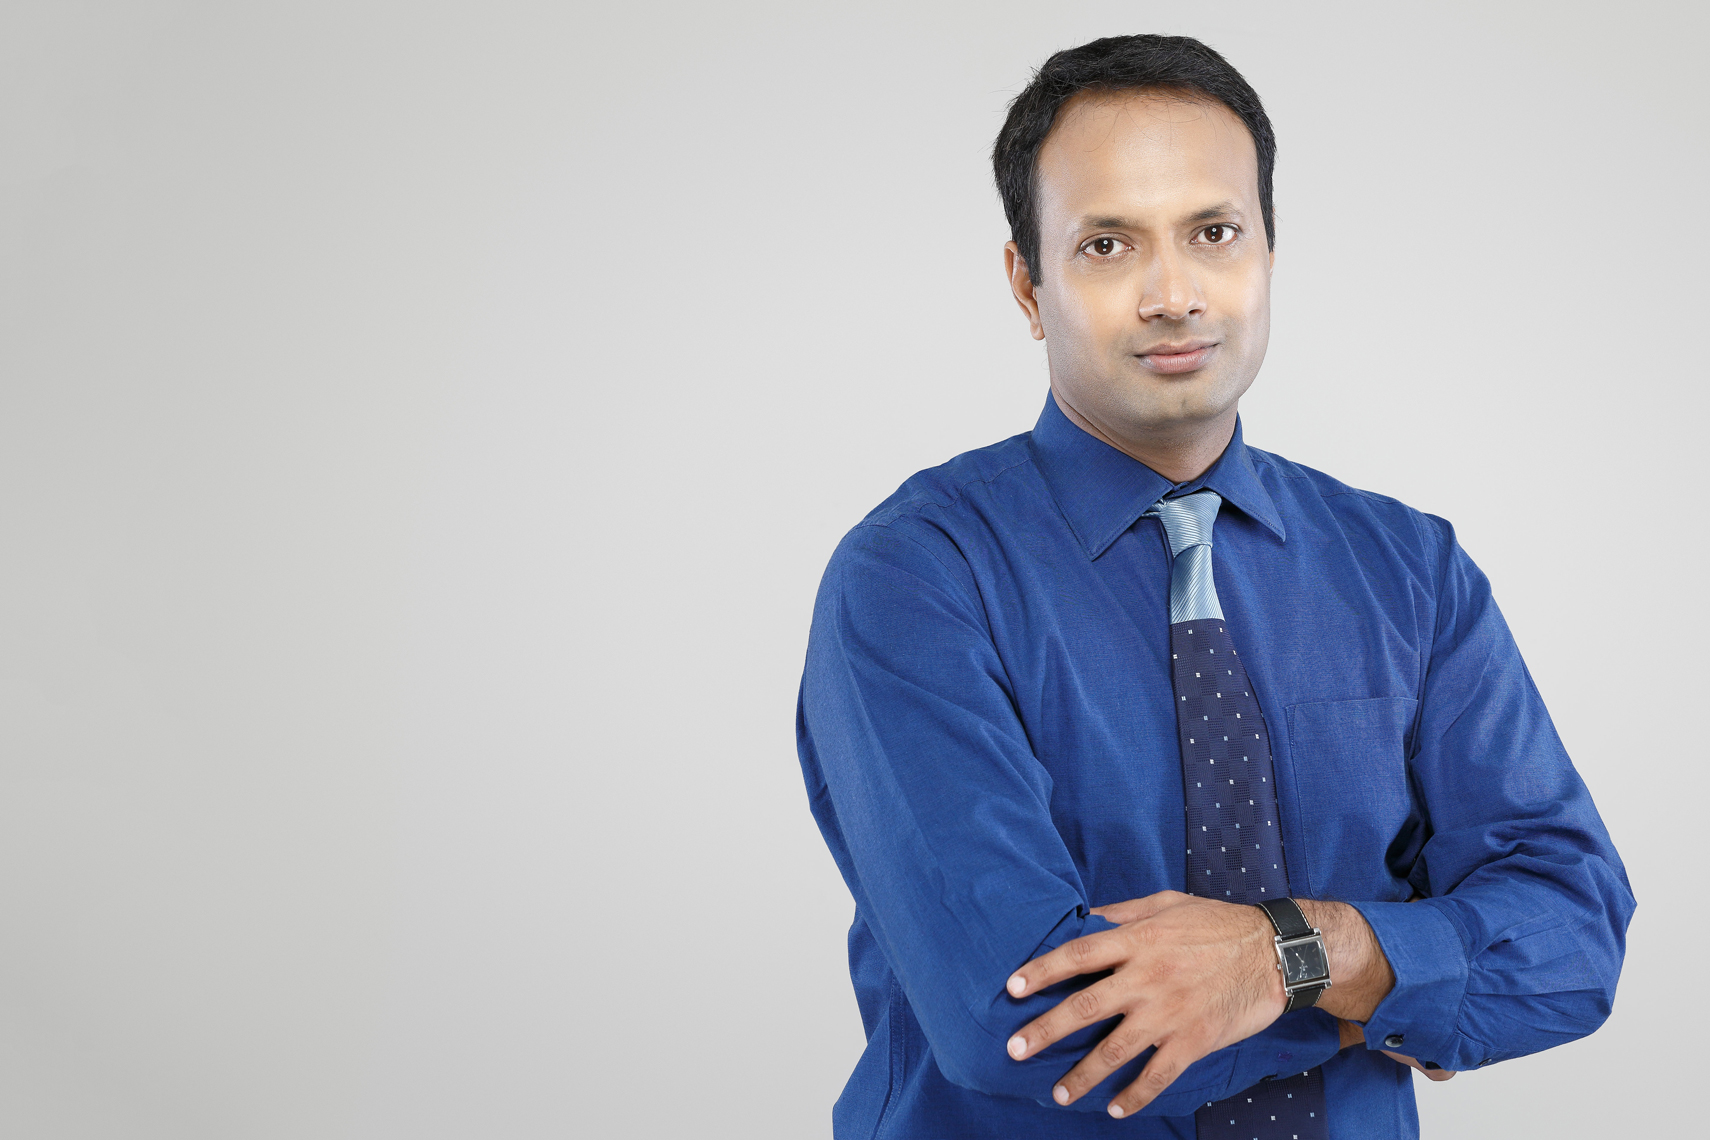 Candid Corporate Photography for a Professional By Arindom Chowdhury